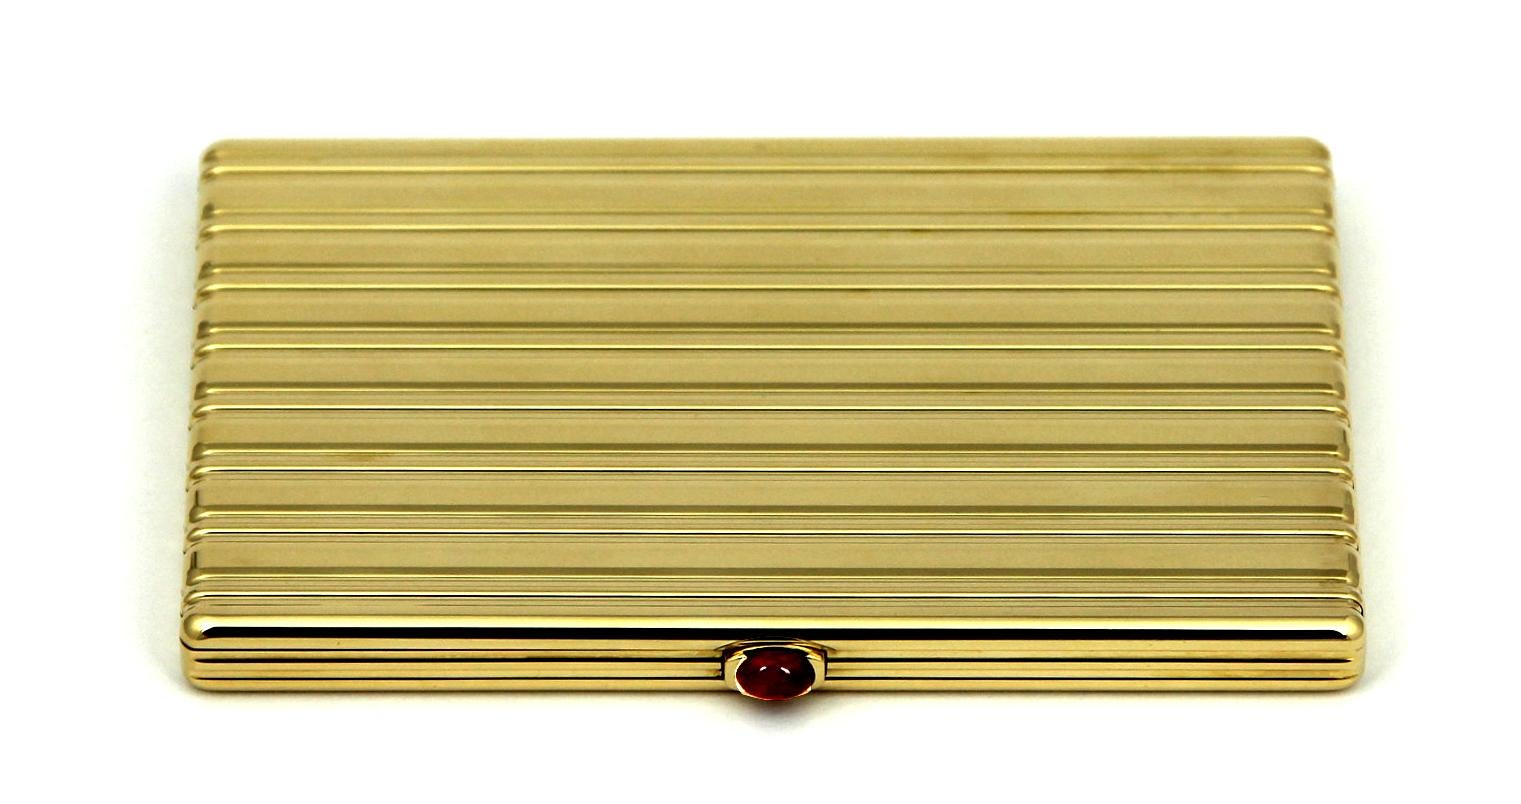 A rectangular 18 karat yellow gold cigarette case, by Cartier, dated 1947, with fitted presentation box. The exterior surface of the case is patterned with undulating horizontal stripes. The push-in ruby cabochon thumb-piece opens the case to reveal